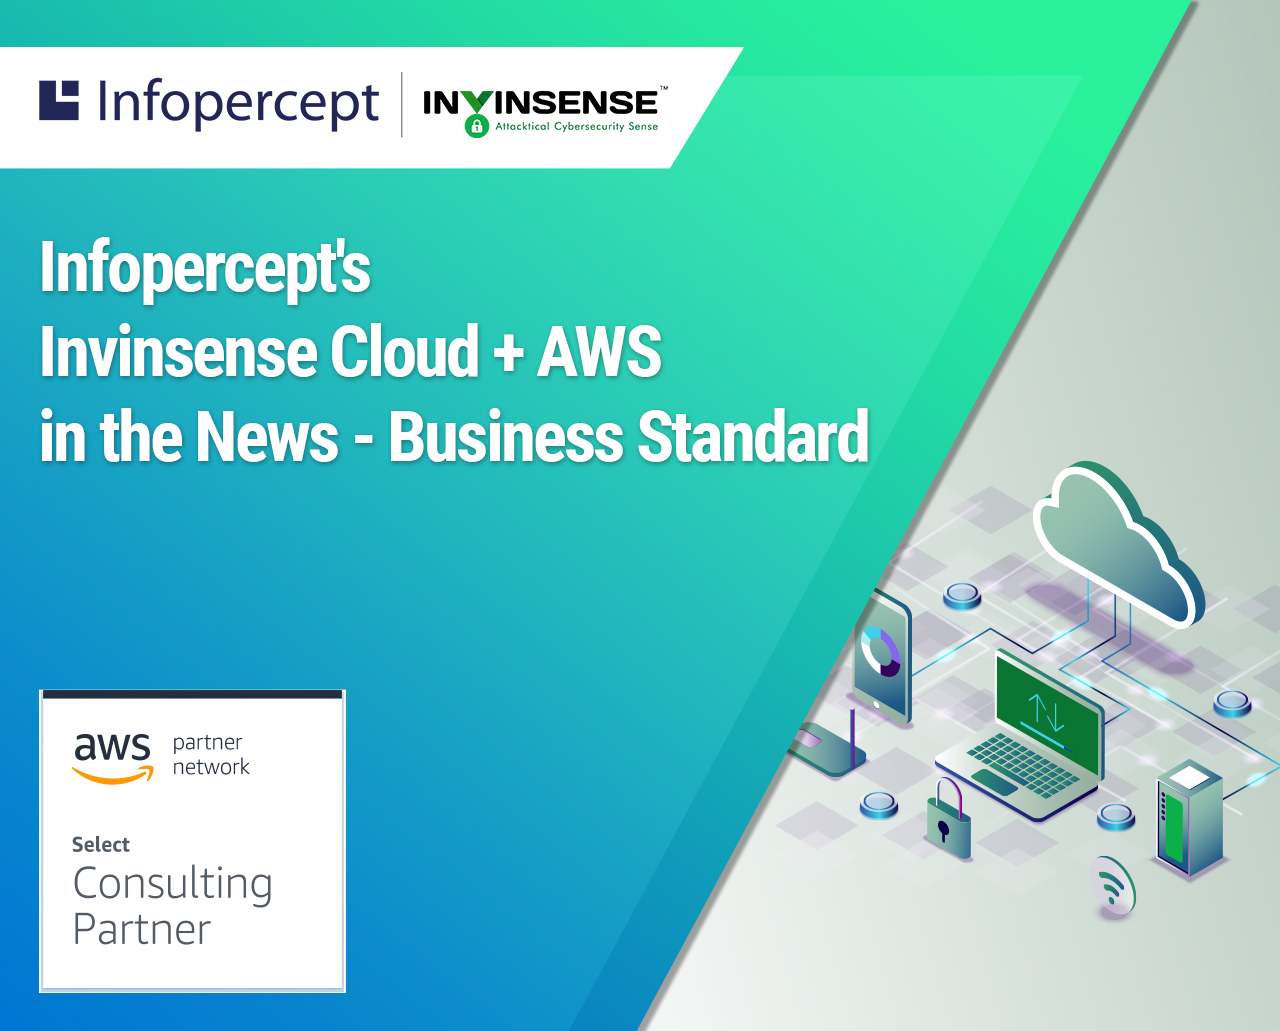 Invinsense Cloud to enhance Cloud Security of Organisations Adopting AWS